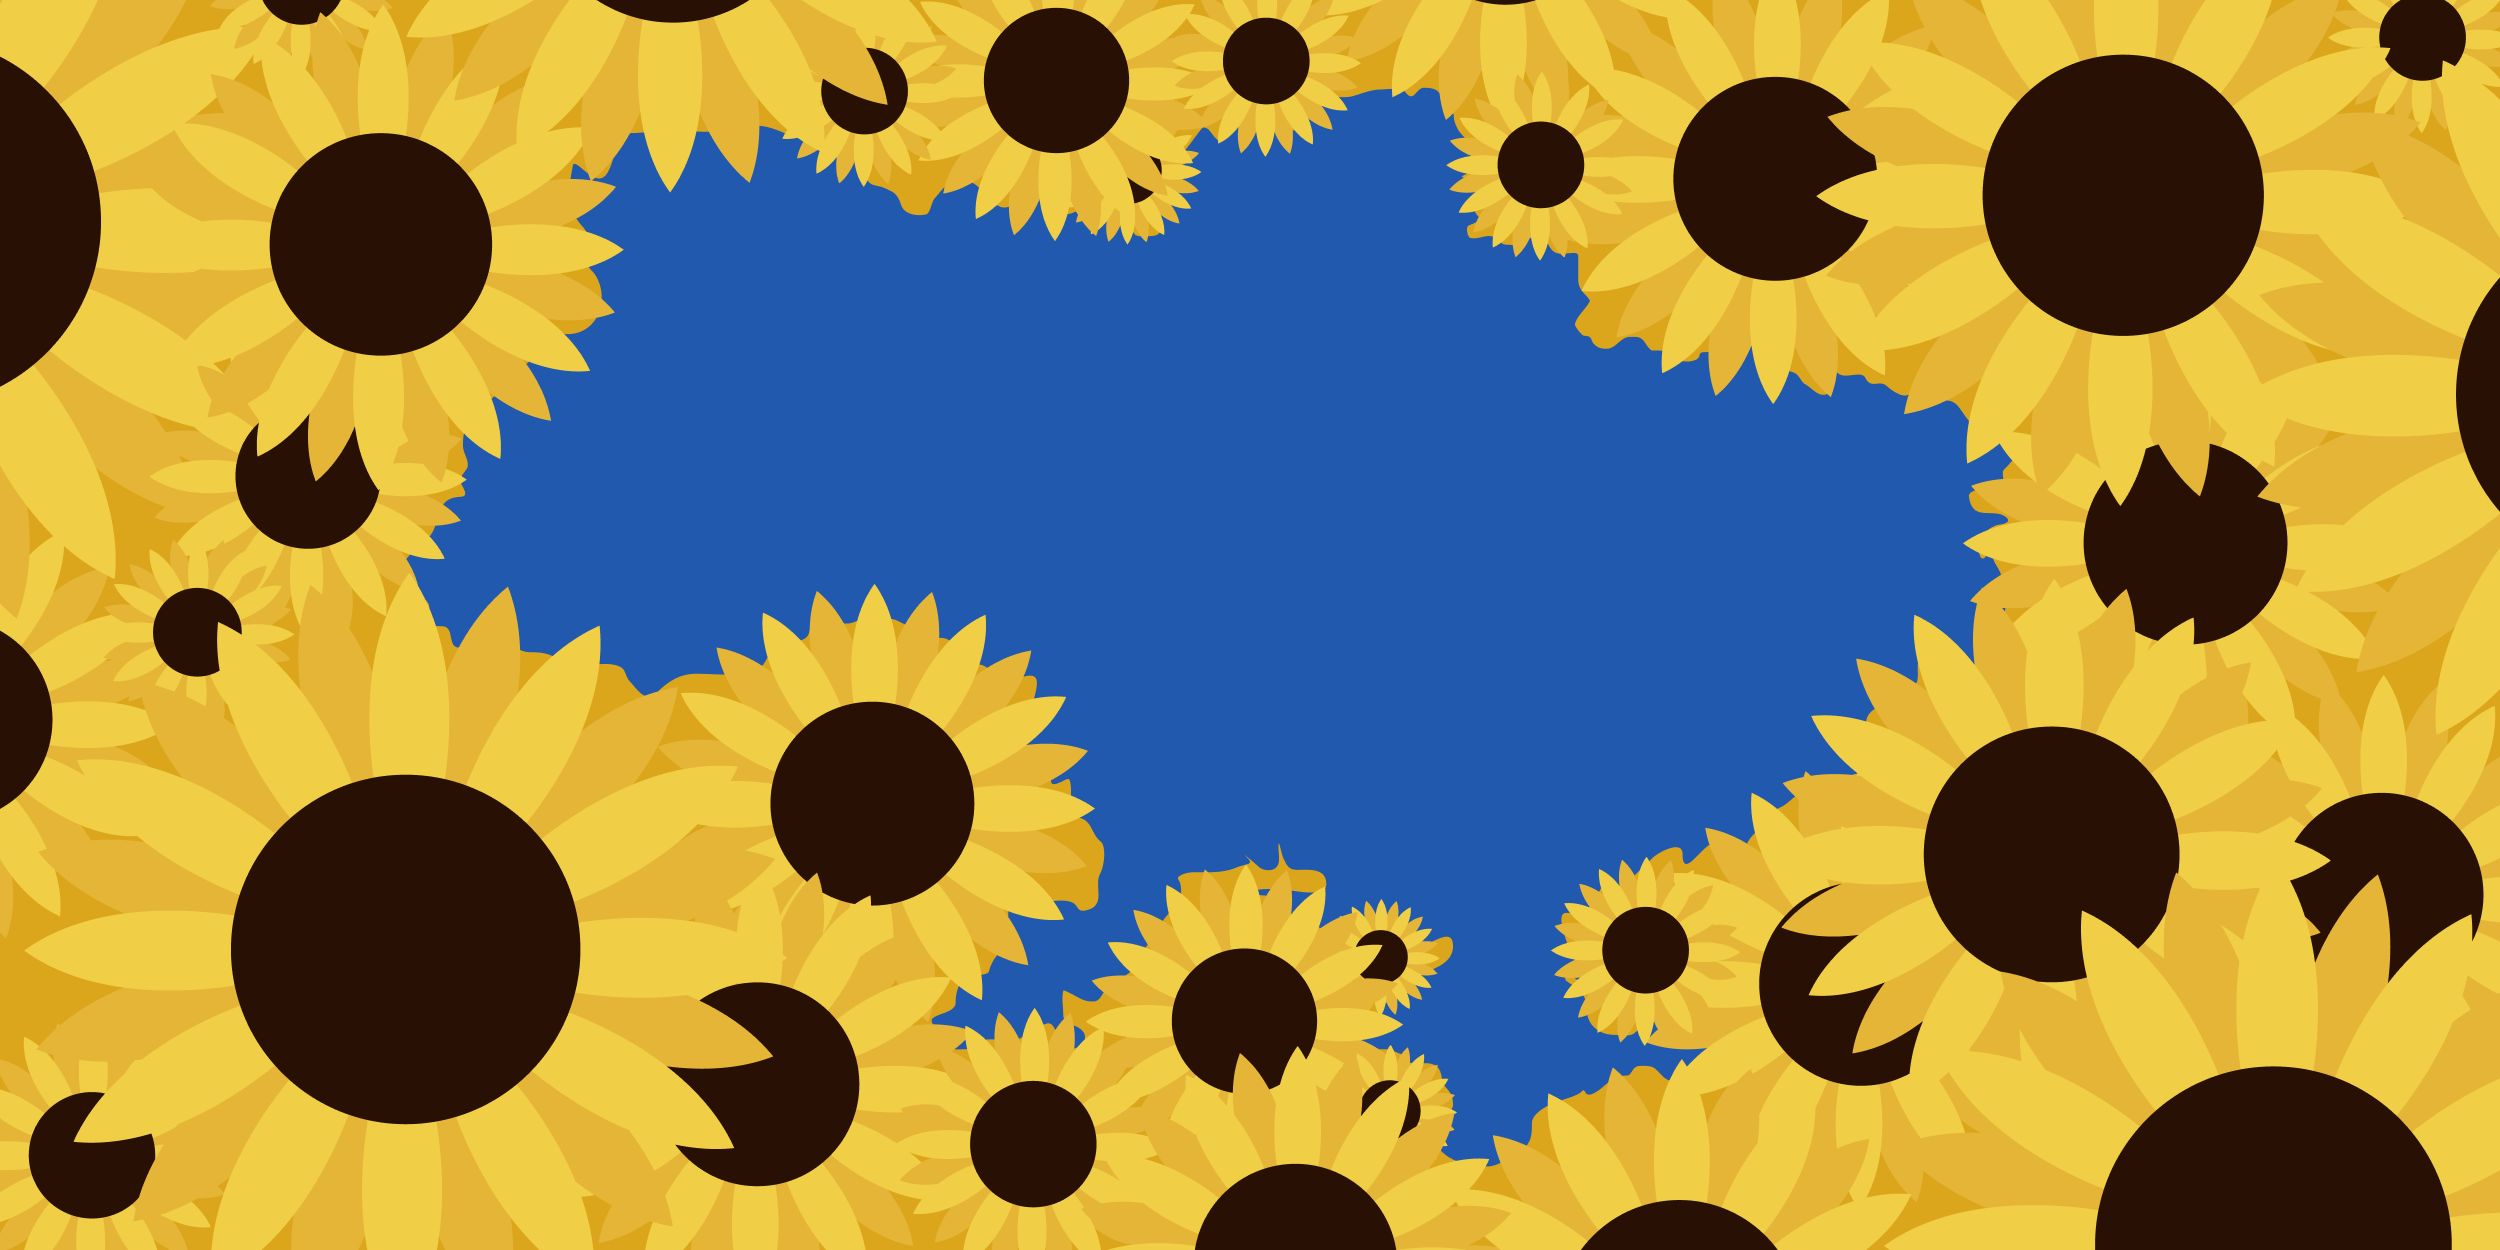 Illustration with sunflowers of various sizes placed on a blue background to create an outline the shape of Ukraine